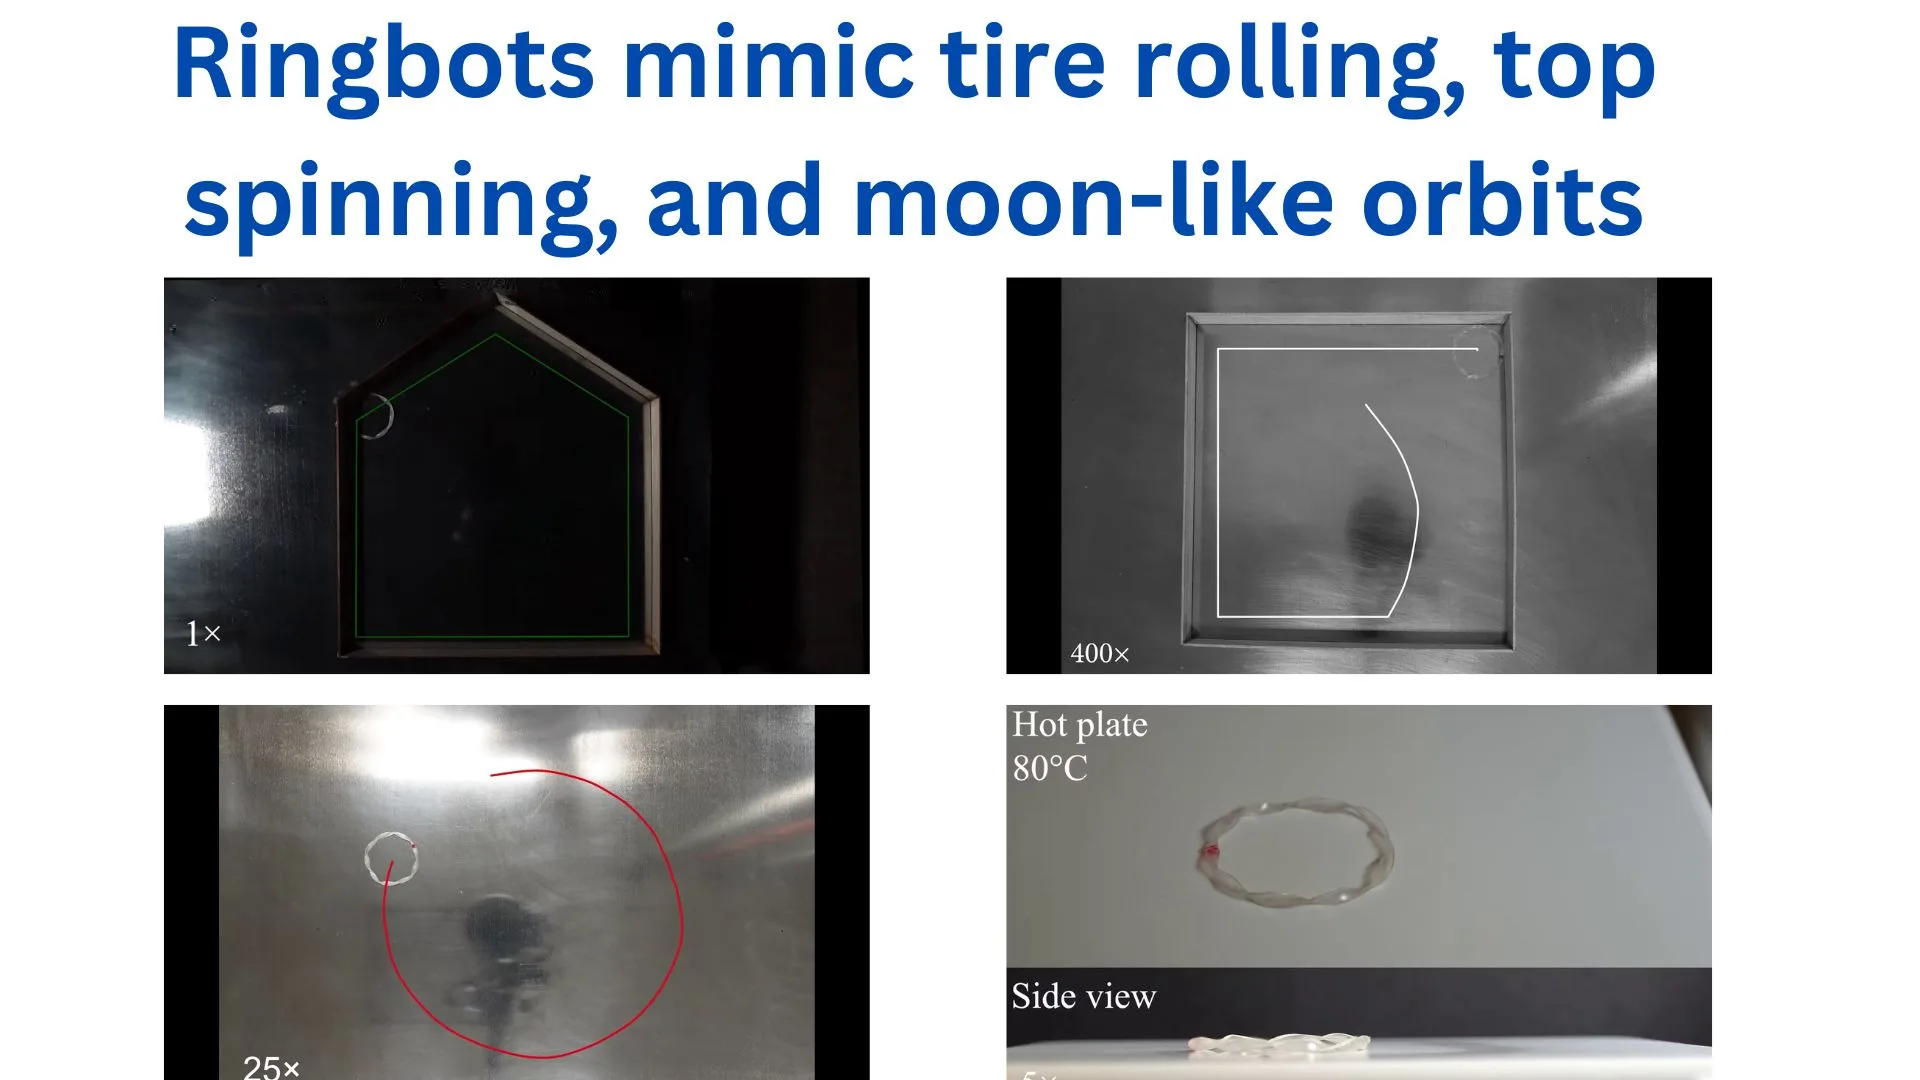 Ringbots mimic tire rolling, top spinning, and moon-like orbits